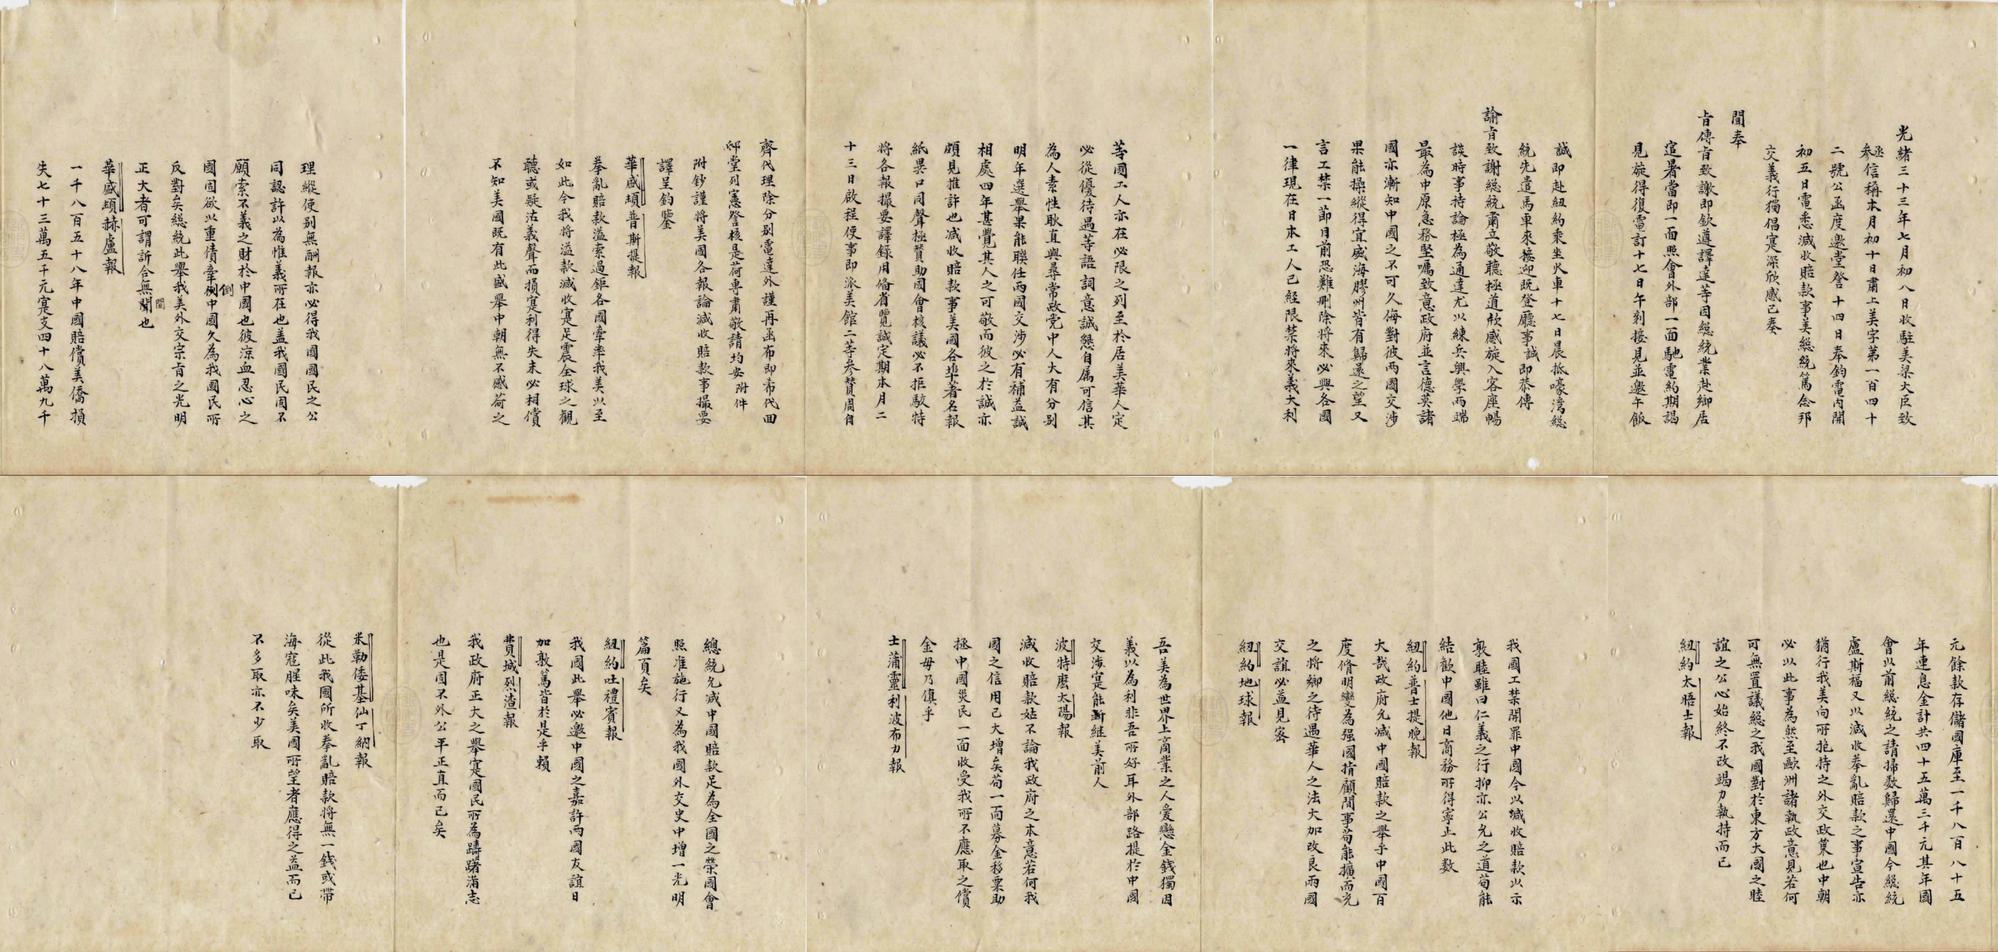 In one of his telegrams to the imperial court, Liang Cheng (梁誠) states that the refund of the Boxer Indemnity was frontpage news in major American newspapers.